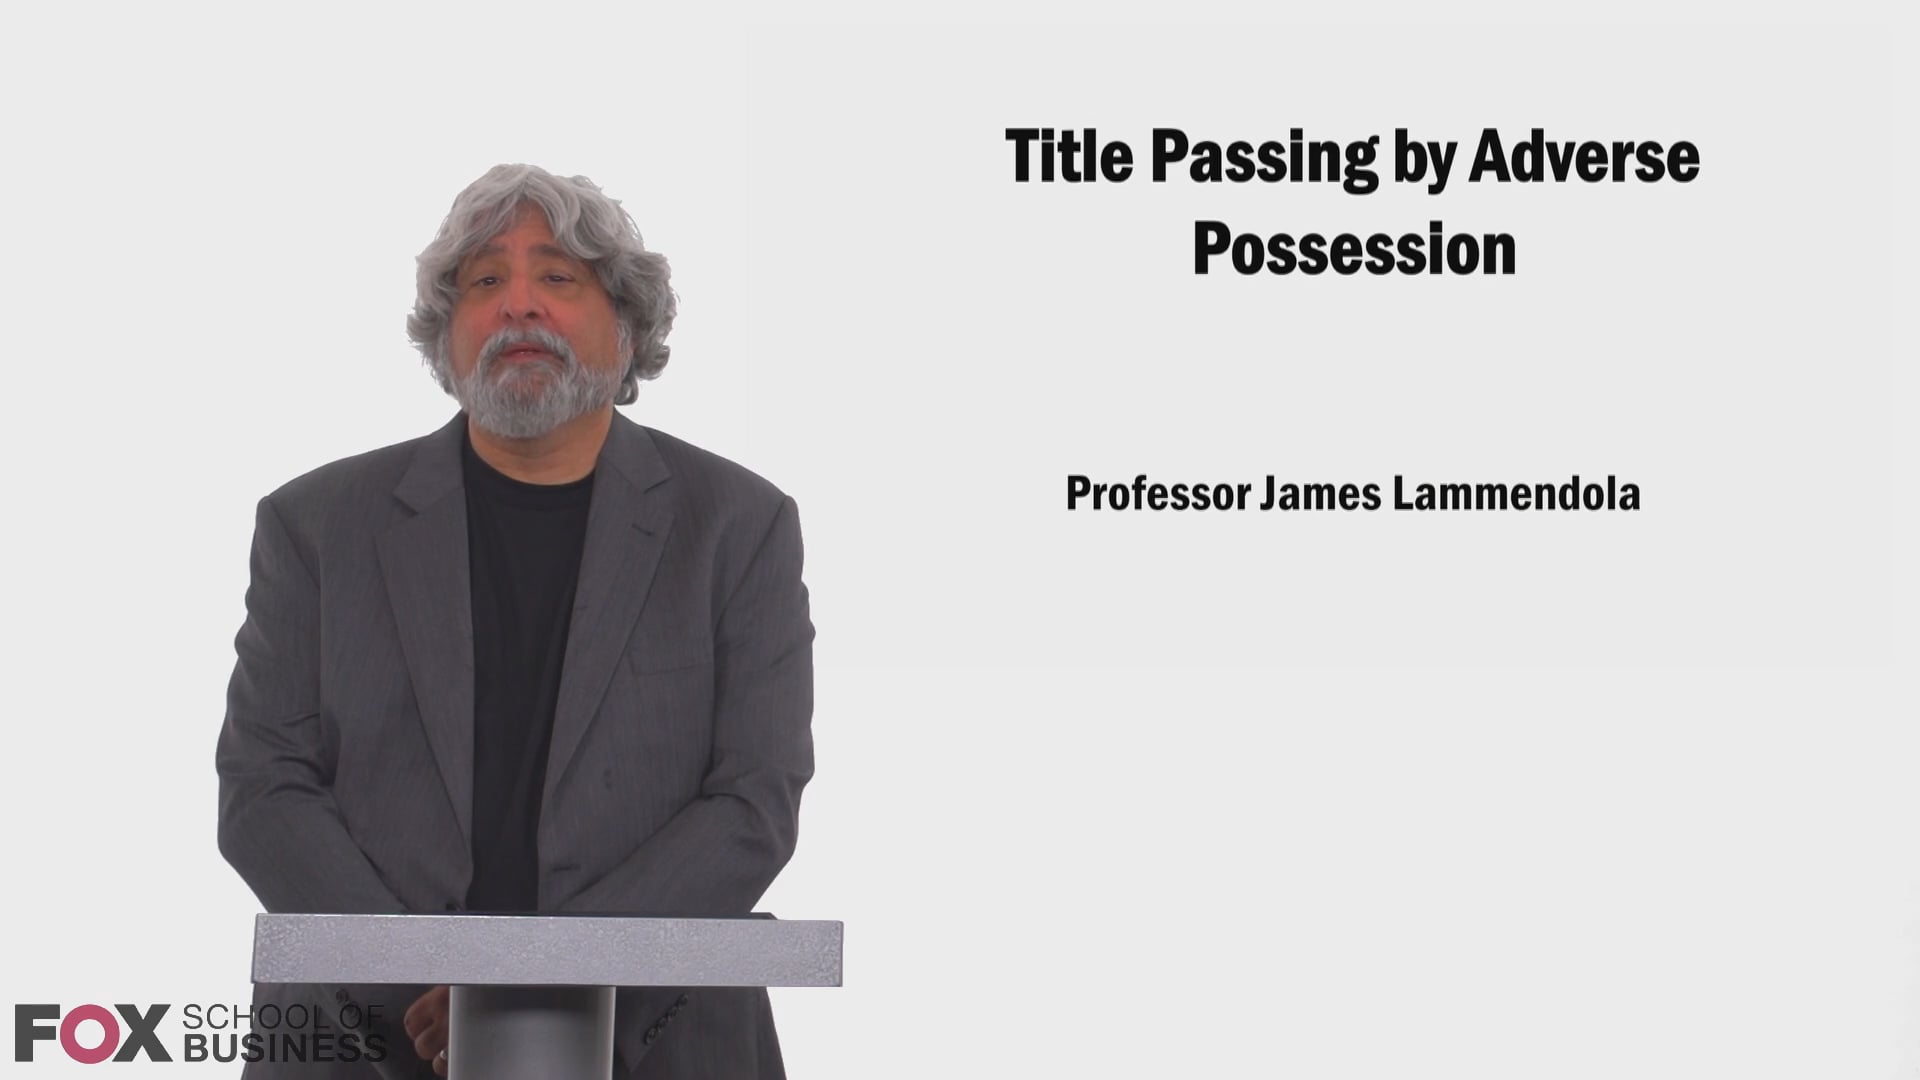 Title Passing by Adverse Possession